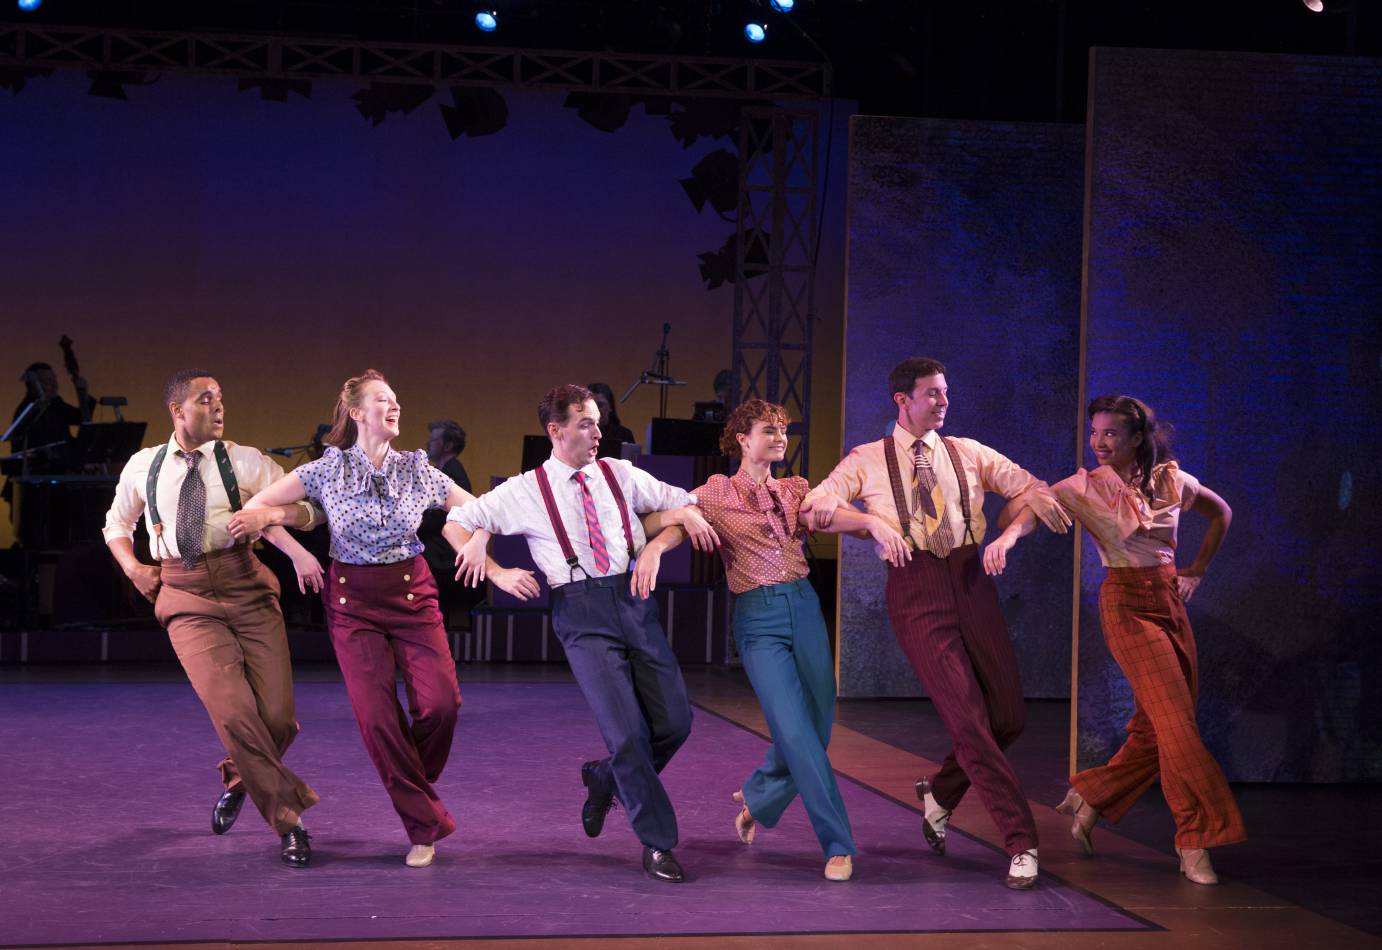 A cast of three men and three women link elbows and extend one foot forward. The woman wear pussy-bow blouses while the men sport suspenders and neckties.